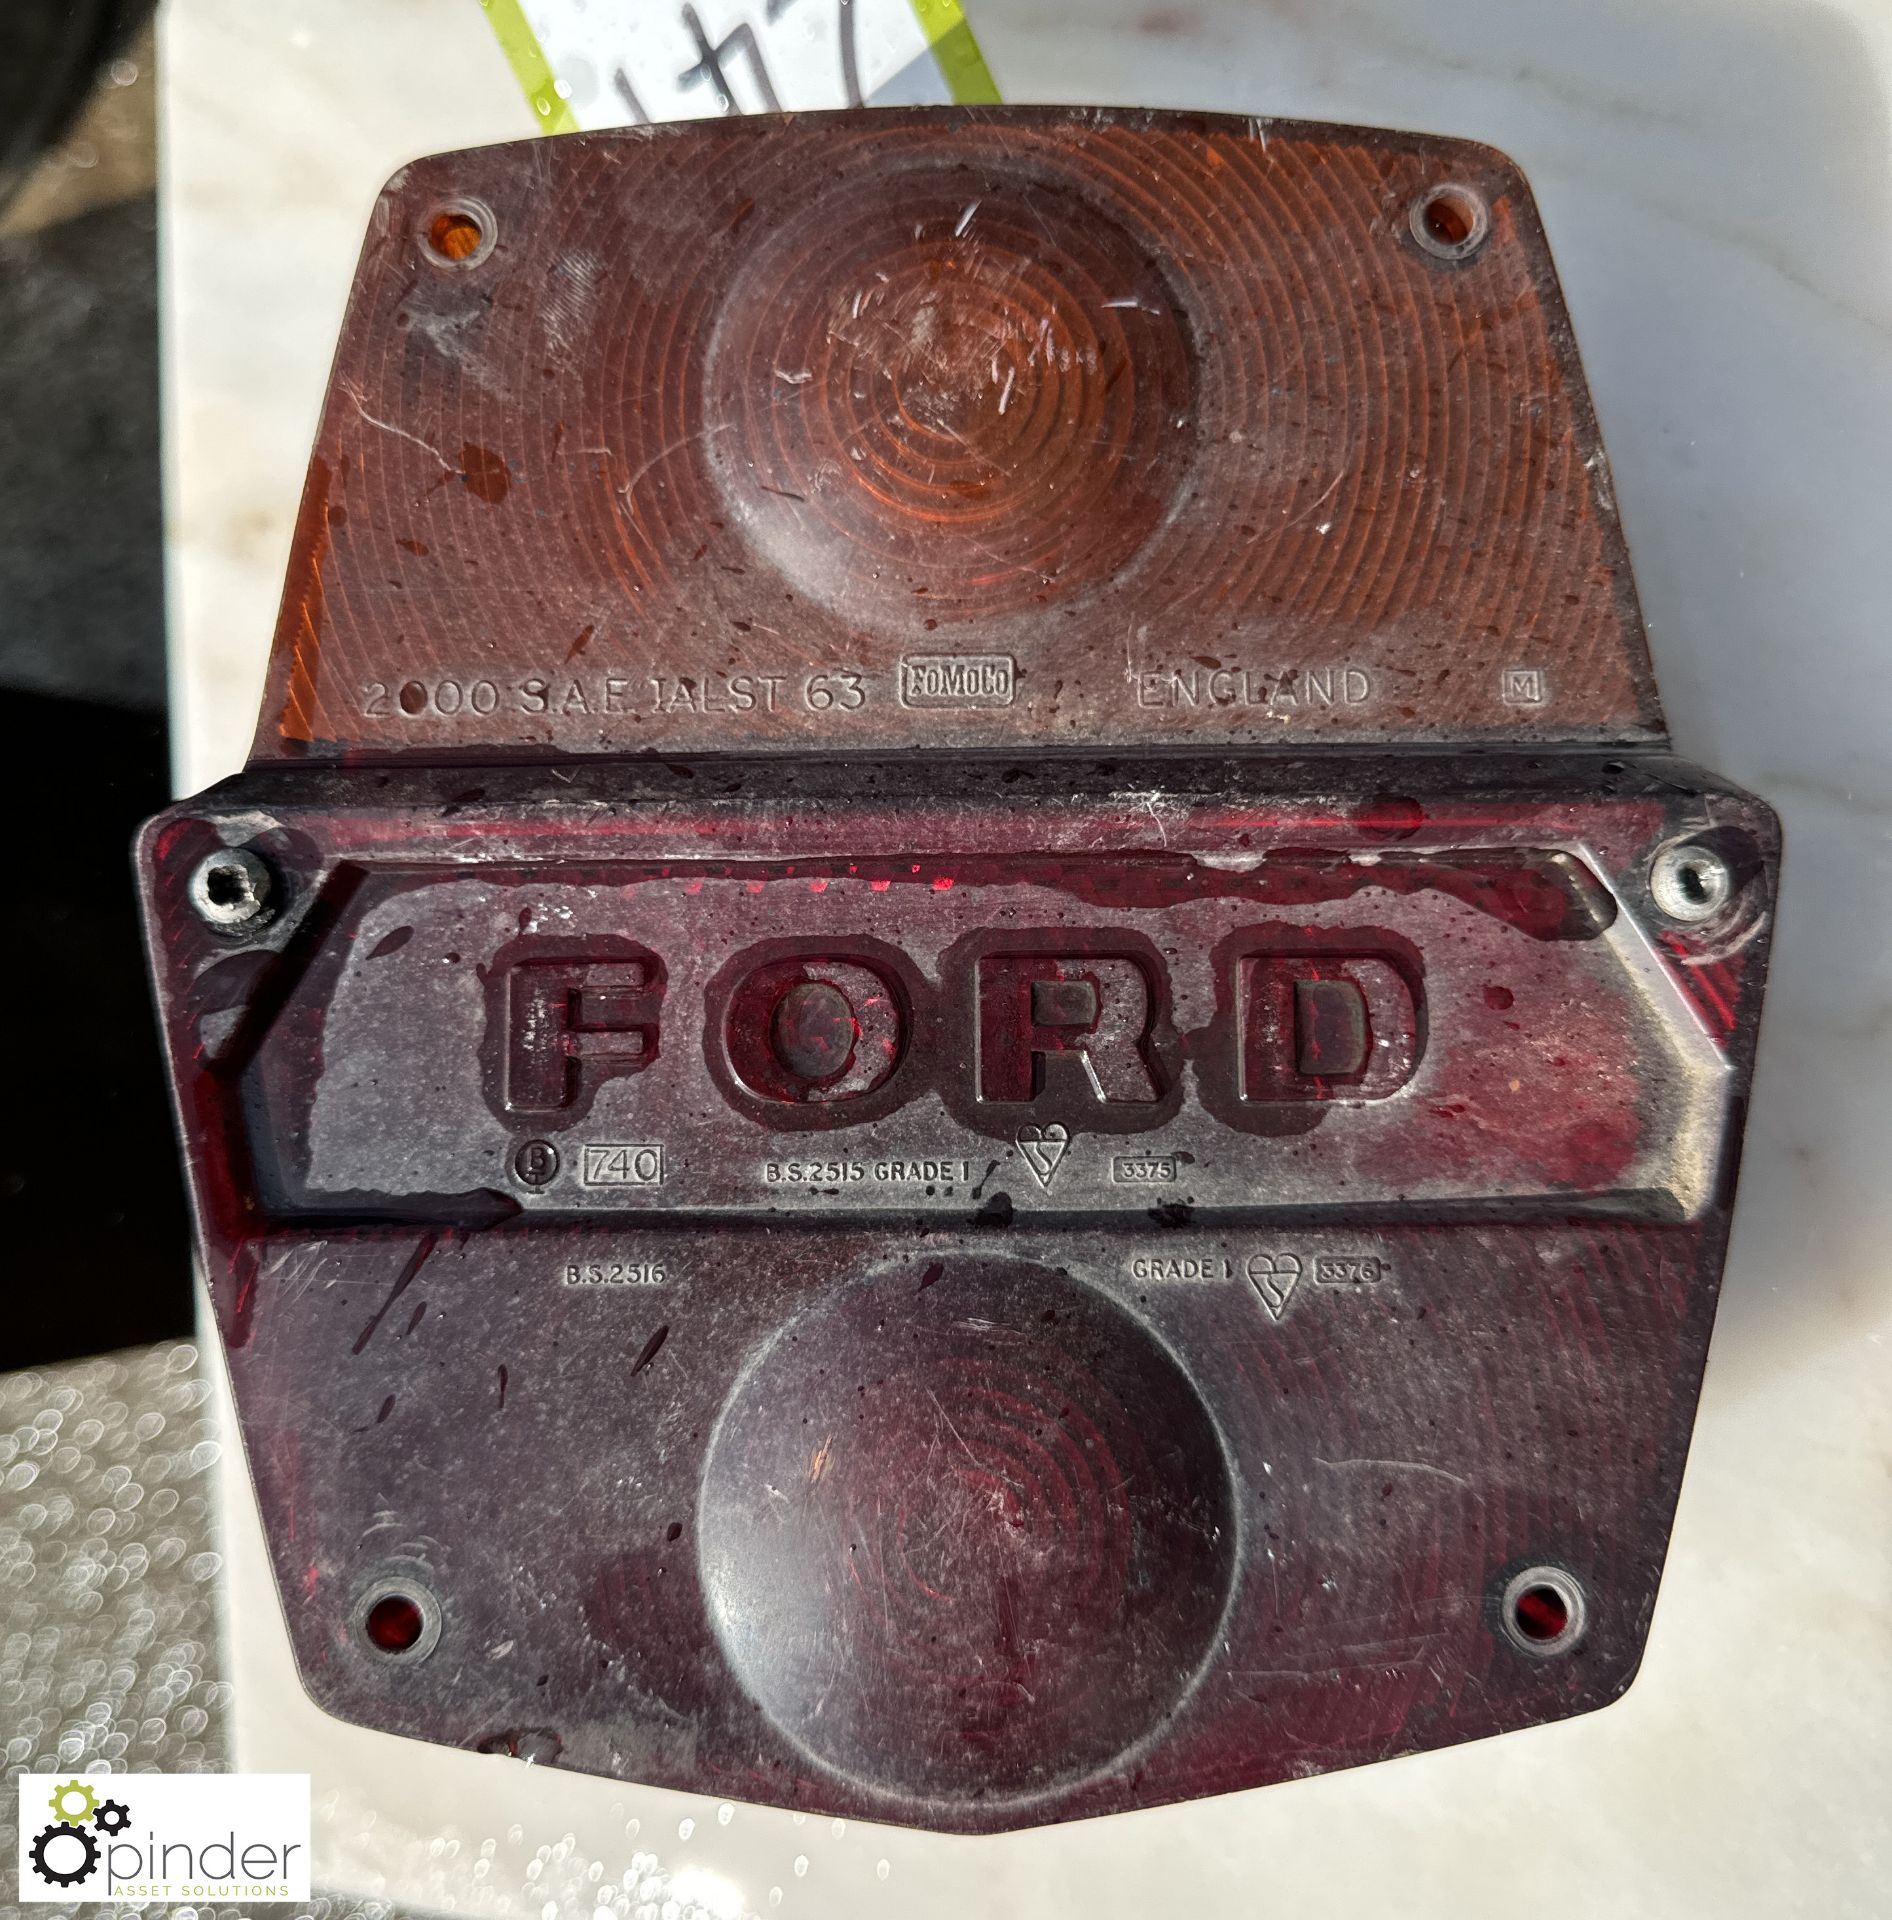 A vintage Ford Rear Light Cluster, once fitted on a Ford D series wagon, circa 1960 to 1970s